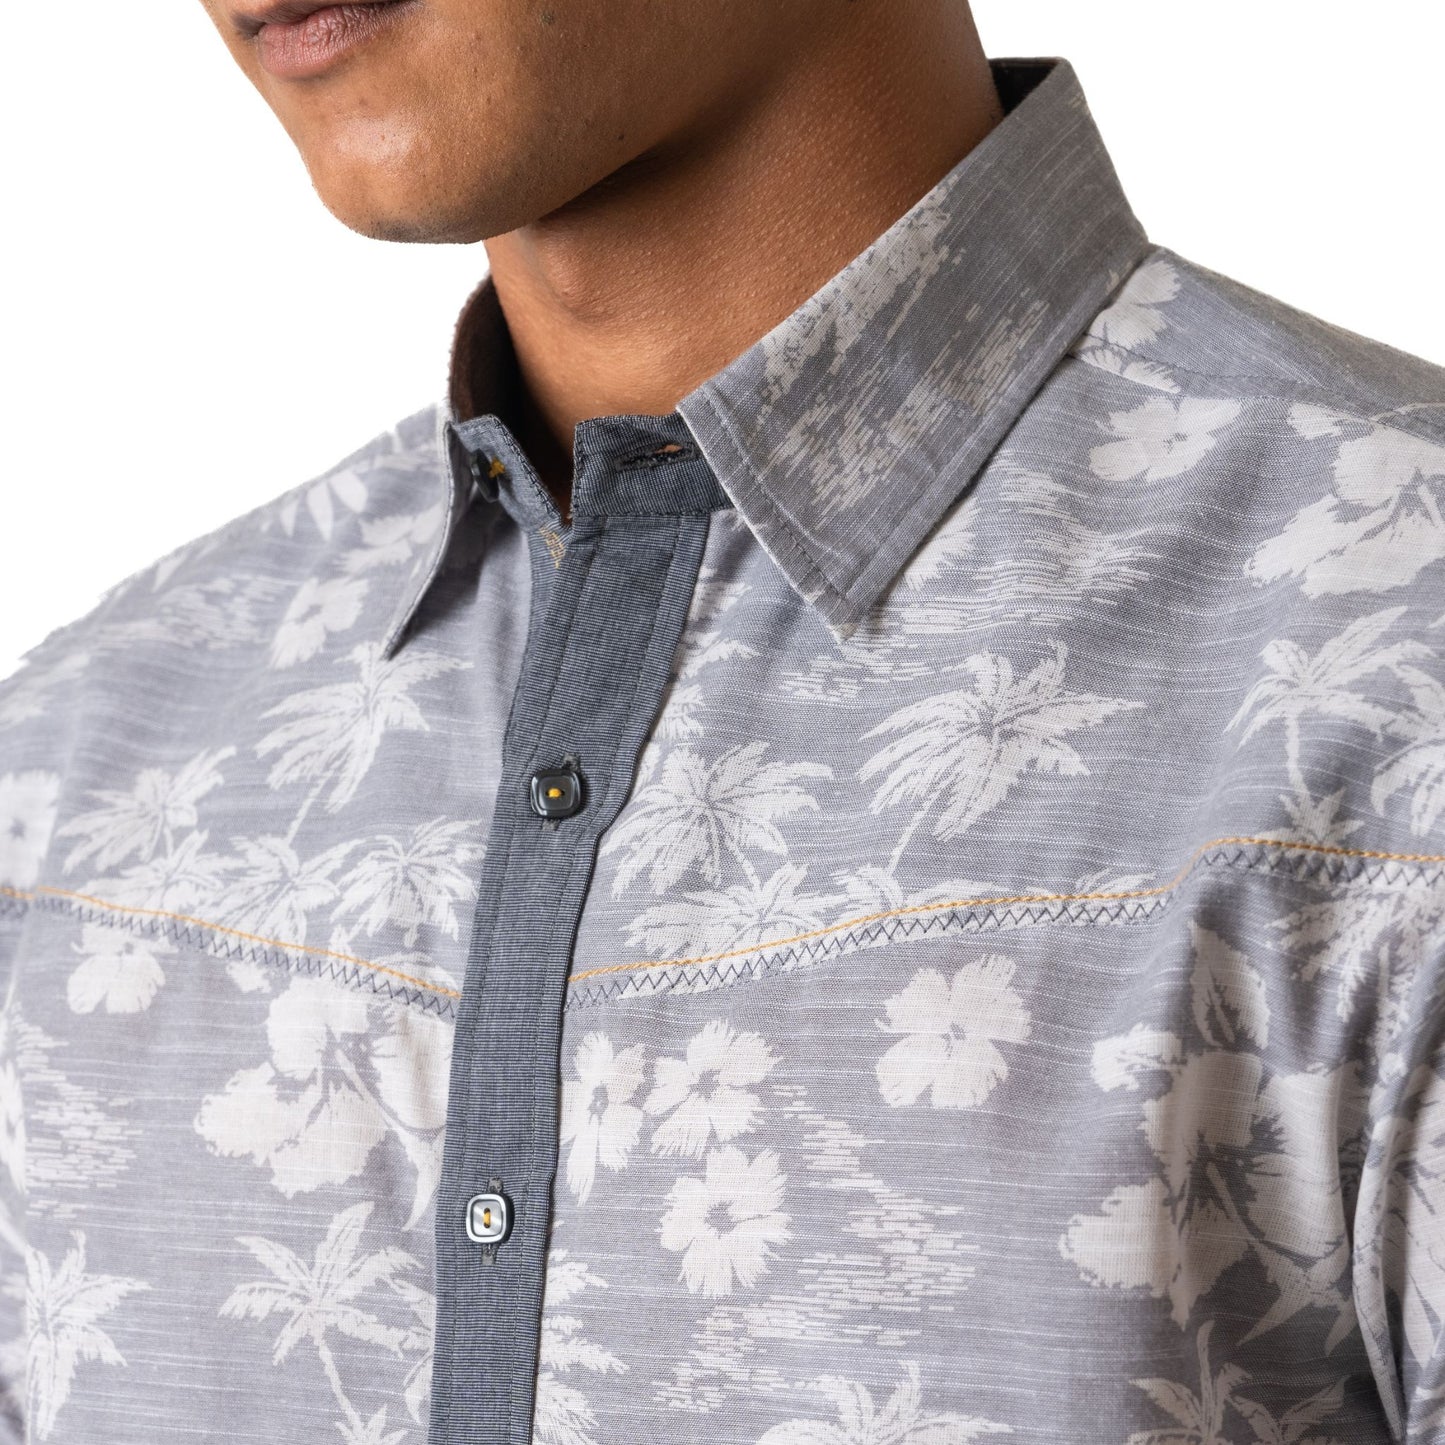 Short sleeve shirt in beach print chambray with zigzag detail on converging yoke at front and under placket